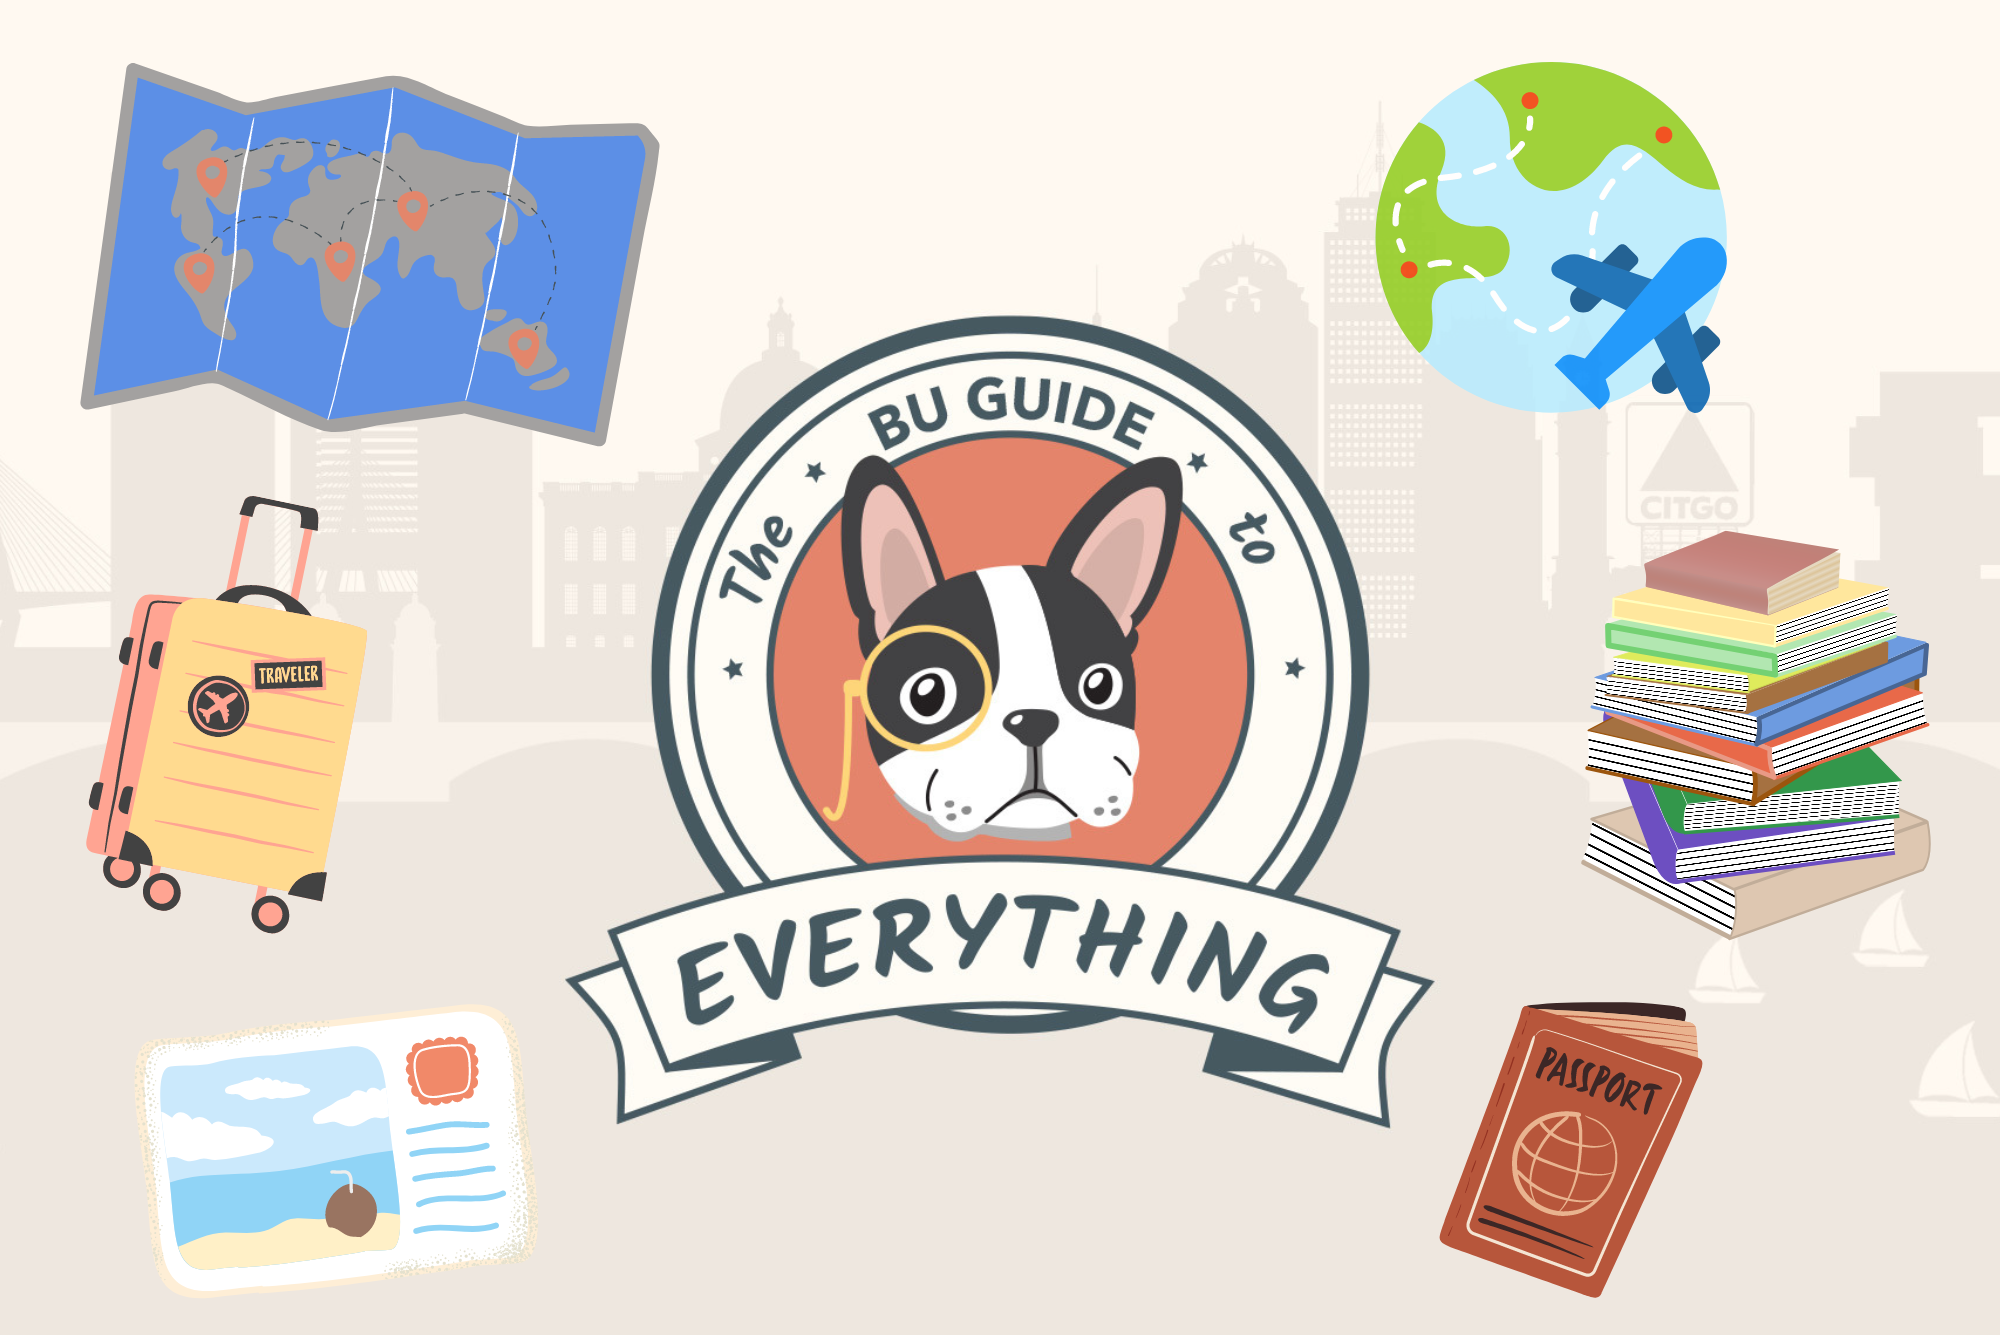 Illustration of a Boston terrier in the middle of a circle with travel accessories floating around its head, like suitcases and a passport. Text reads "Your everything guide"